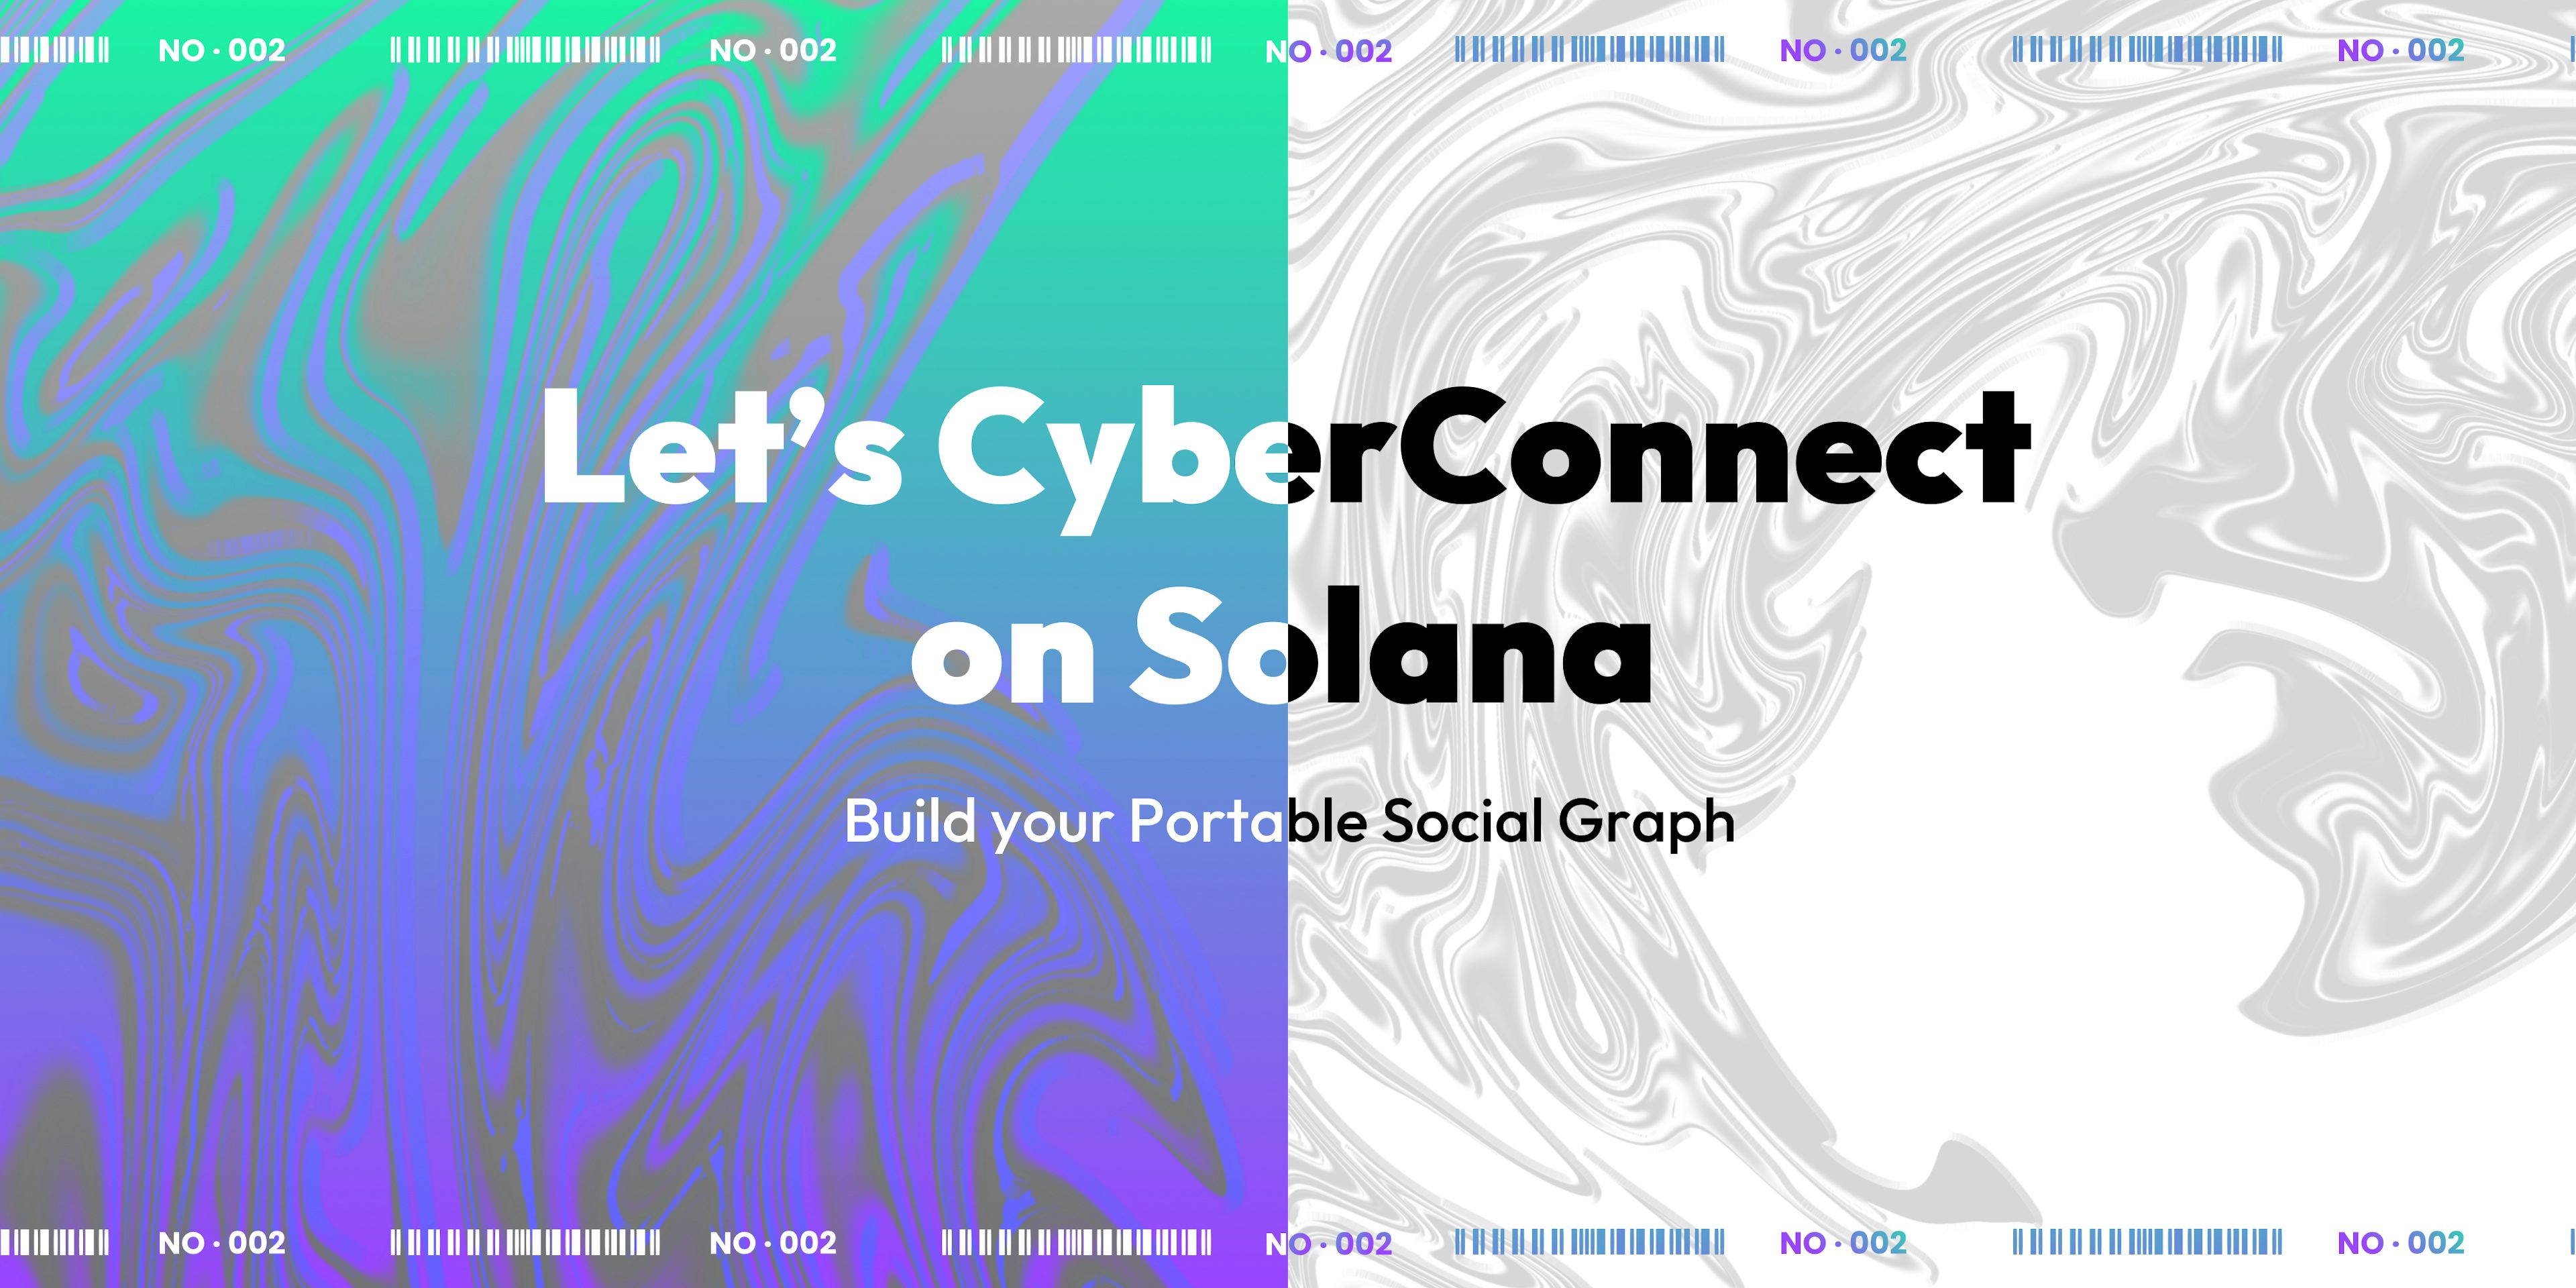 Let’s CyberConnect on Solana